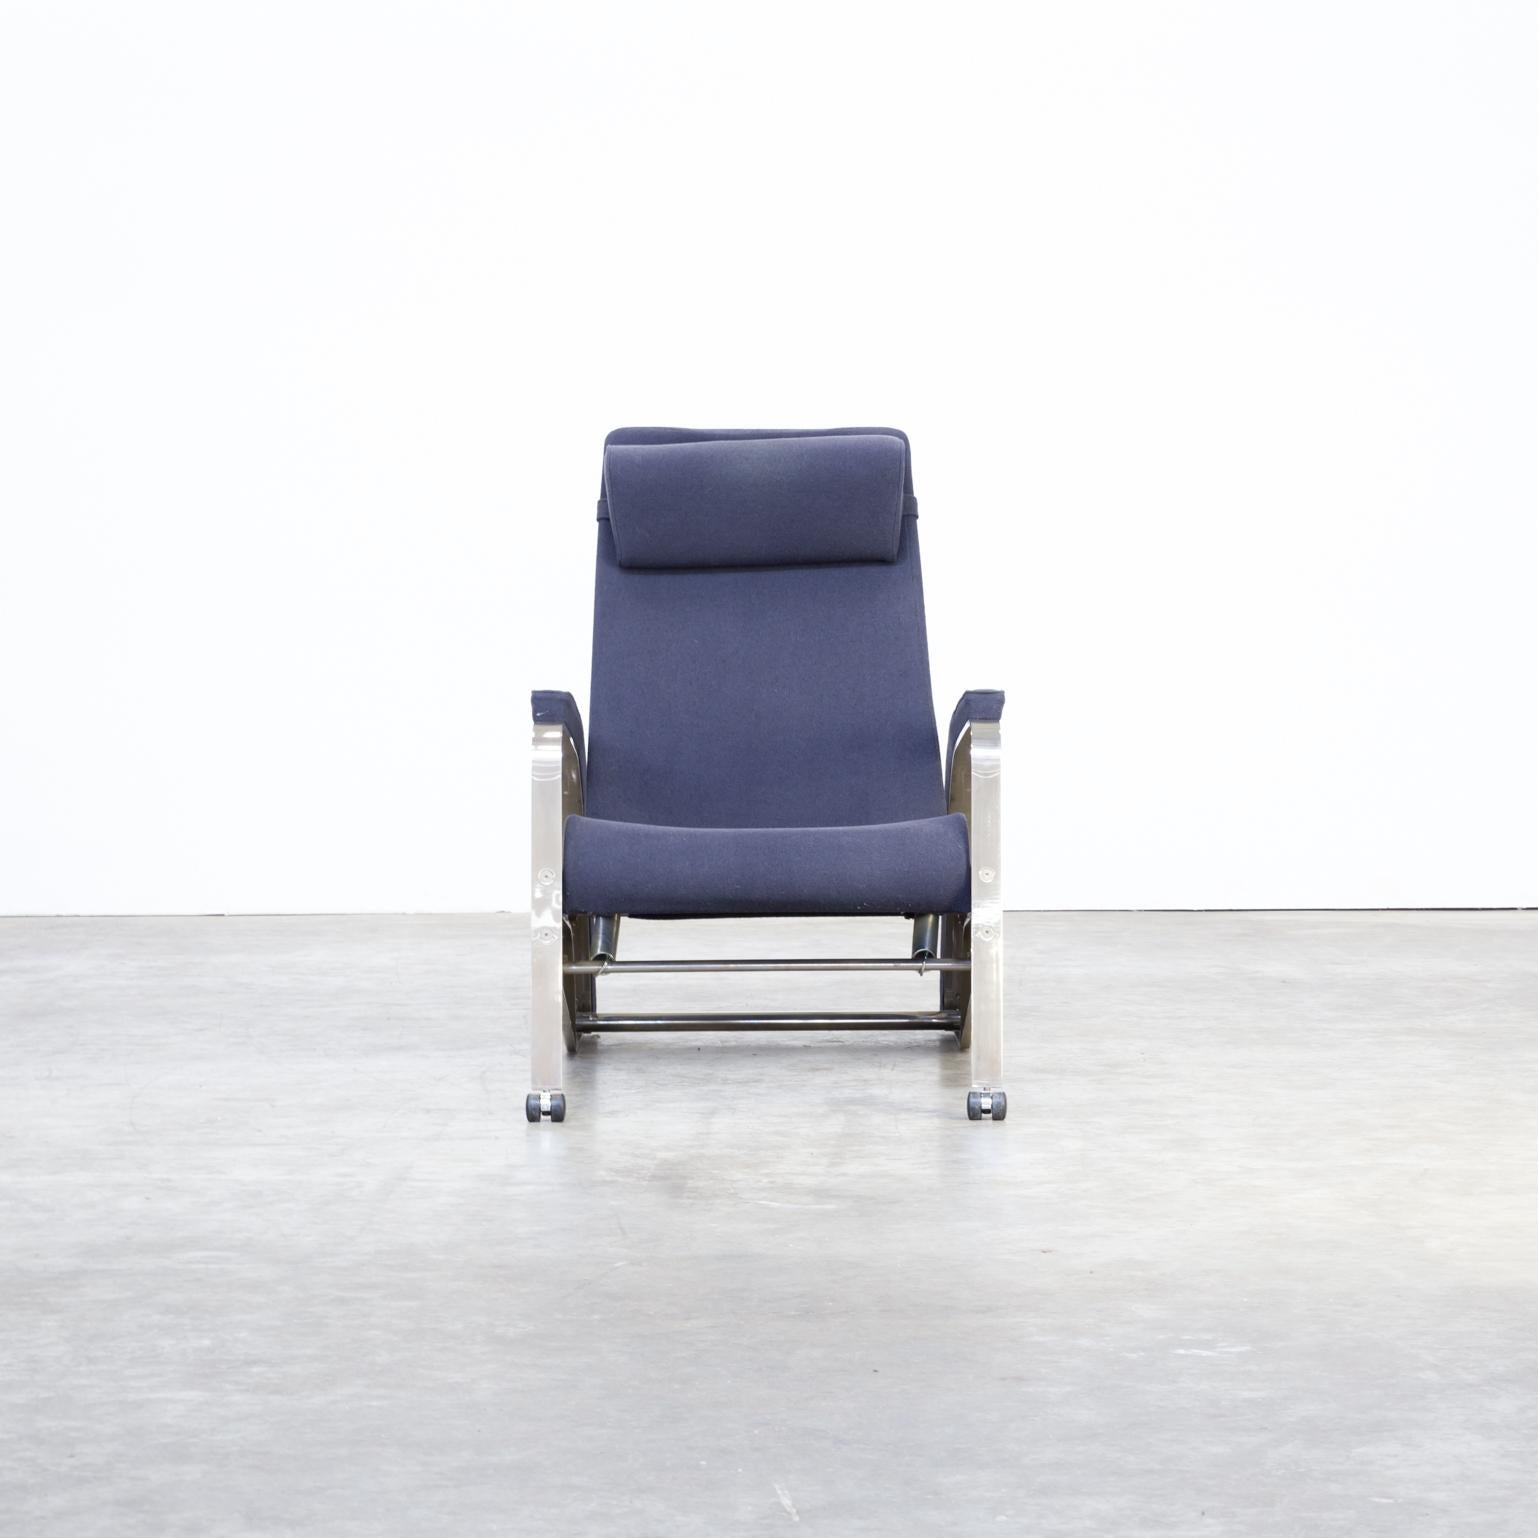 Jean Prouvé Grand Repos ‘D80-1’ metal and fabric lounge chair for Tecta. Good condition consistent with age and use.